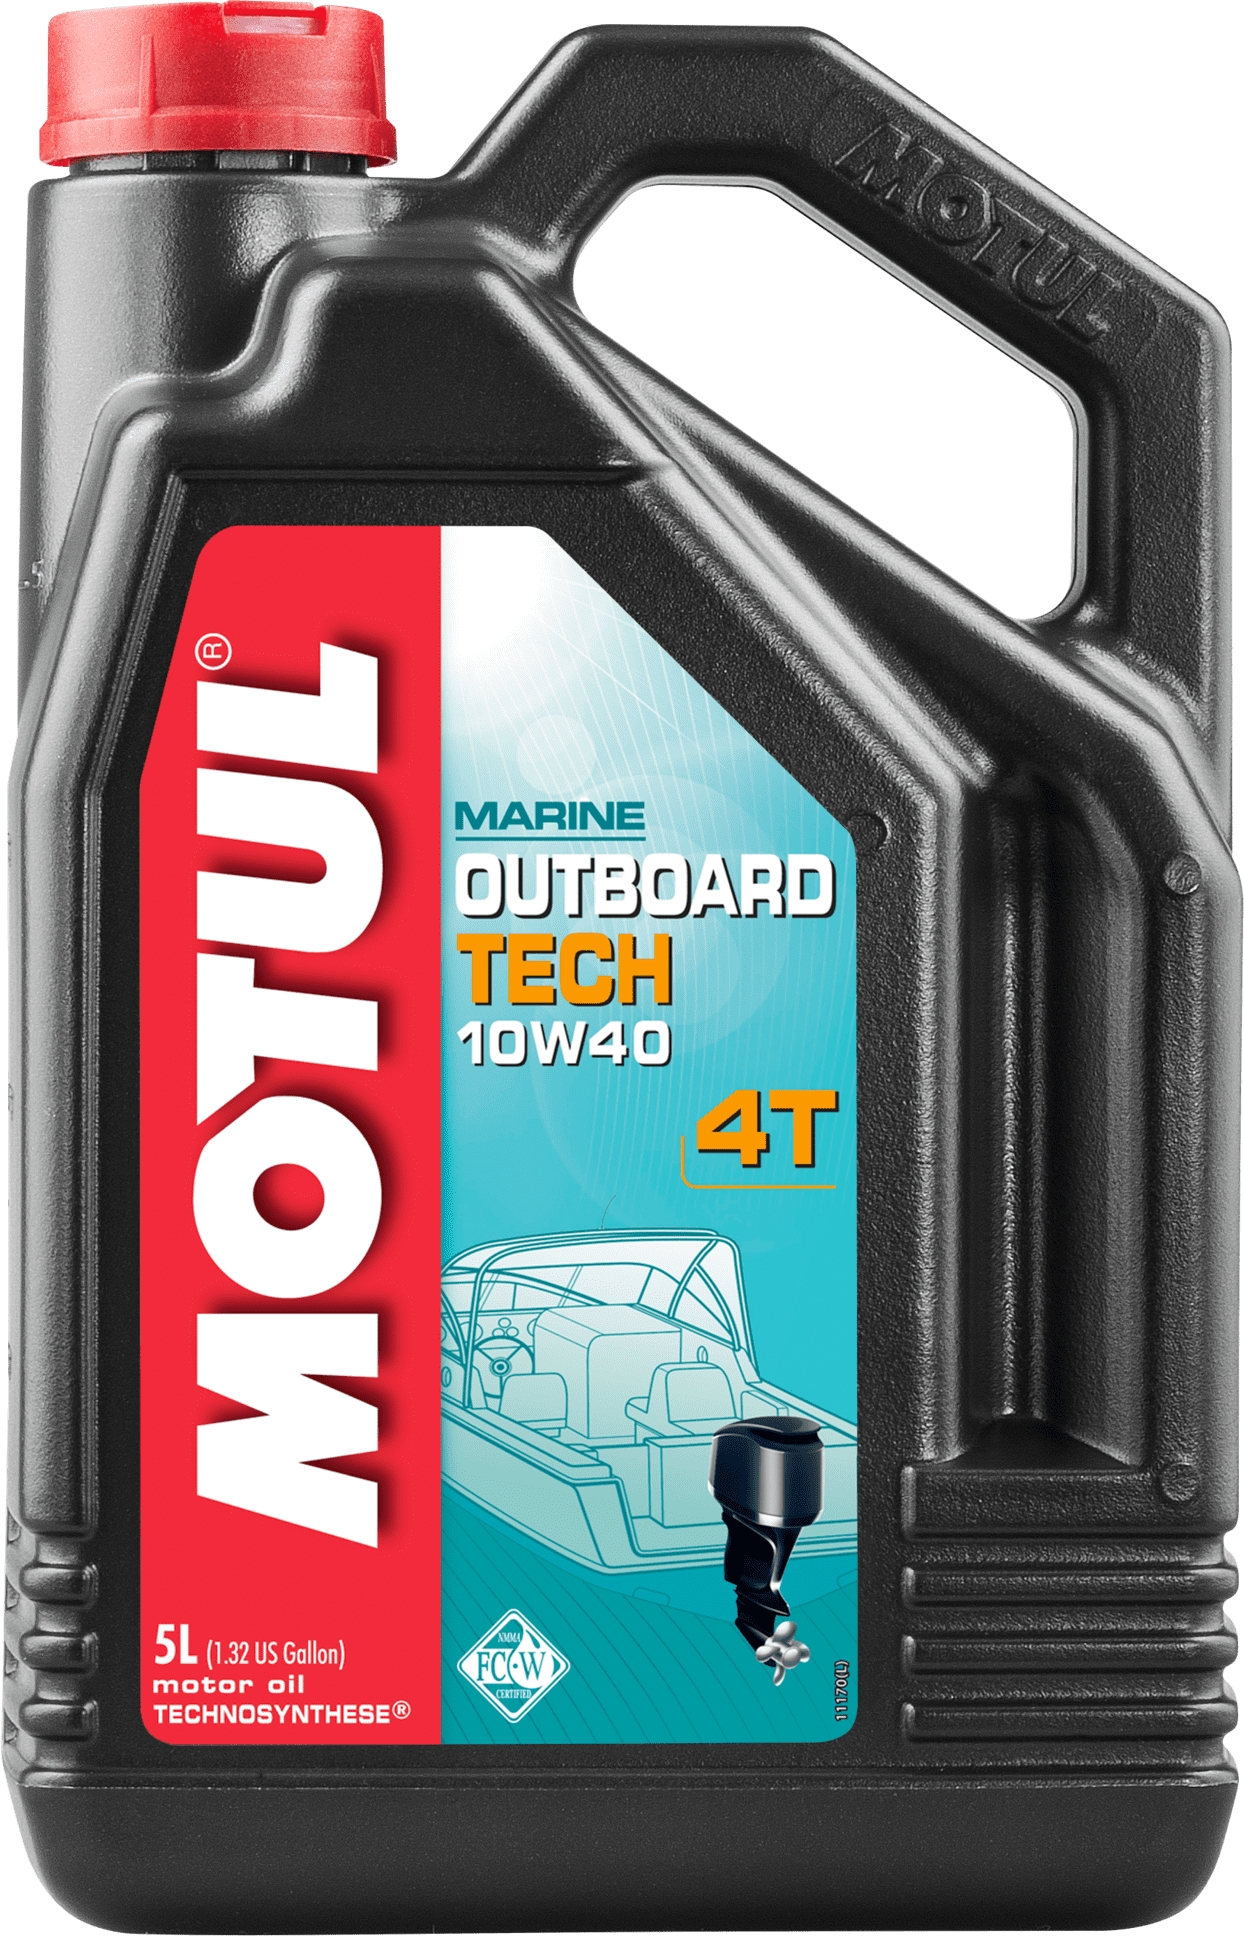 106354-5 Technosynthese® lubricant for 4-Stroke Outboard or sterndrive engines calling for NMMA FC-W lubricants.